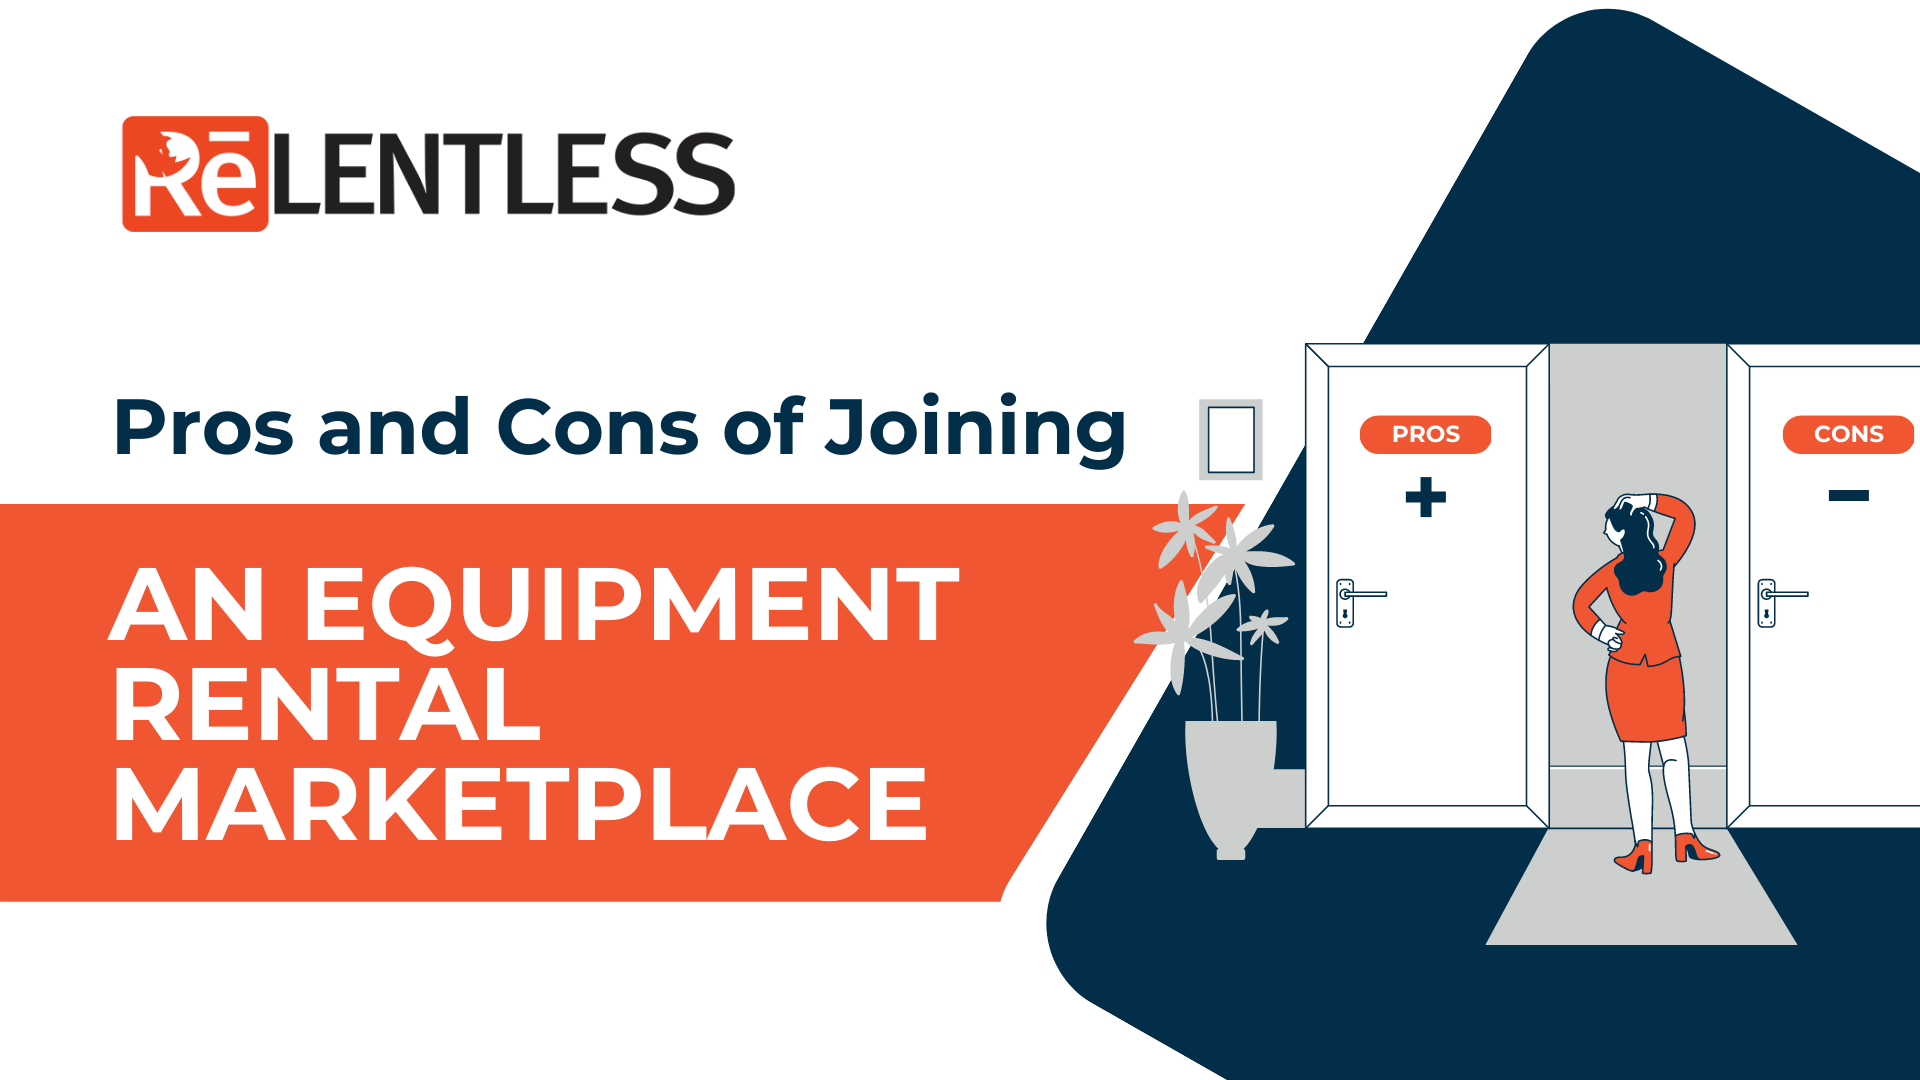 Pros and Cons of Joining an Equipment Rental Marketplace